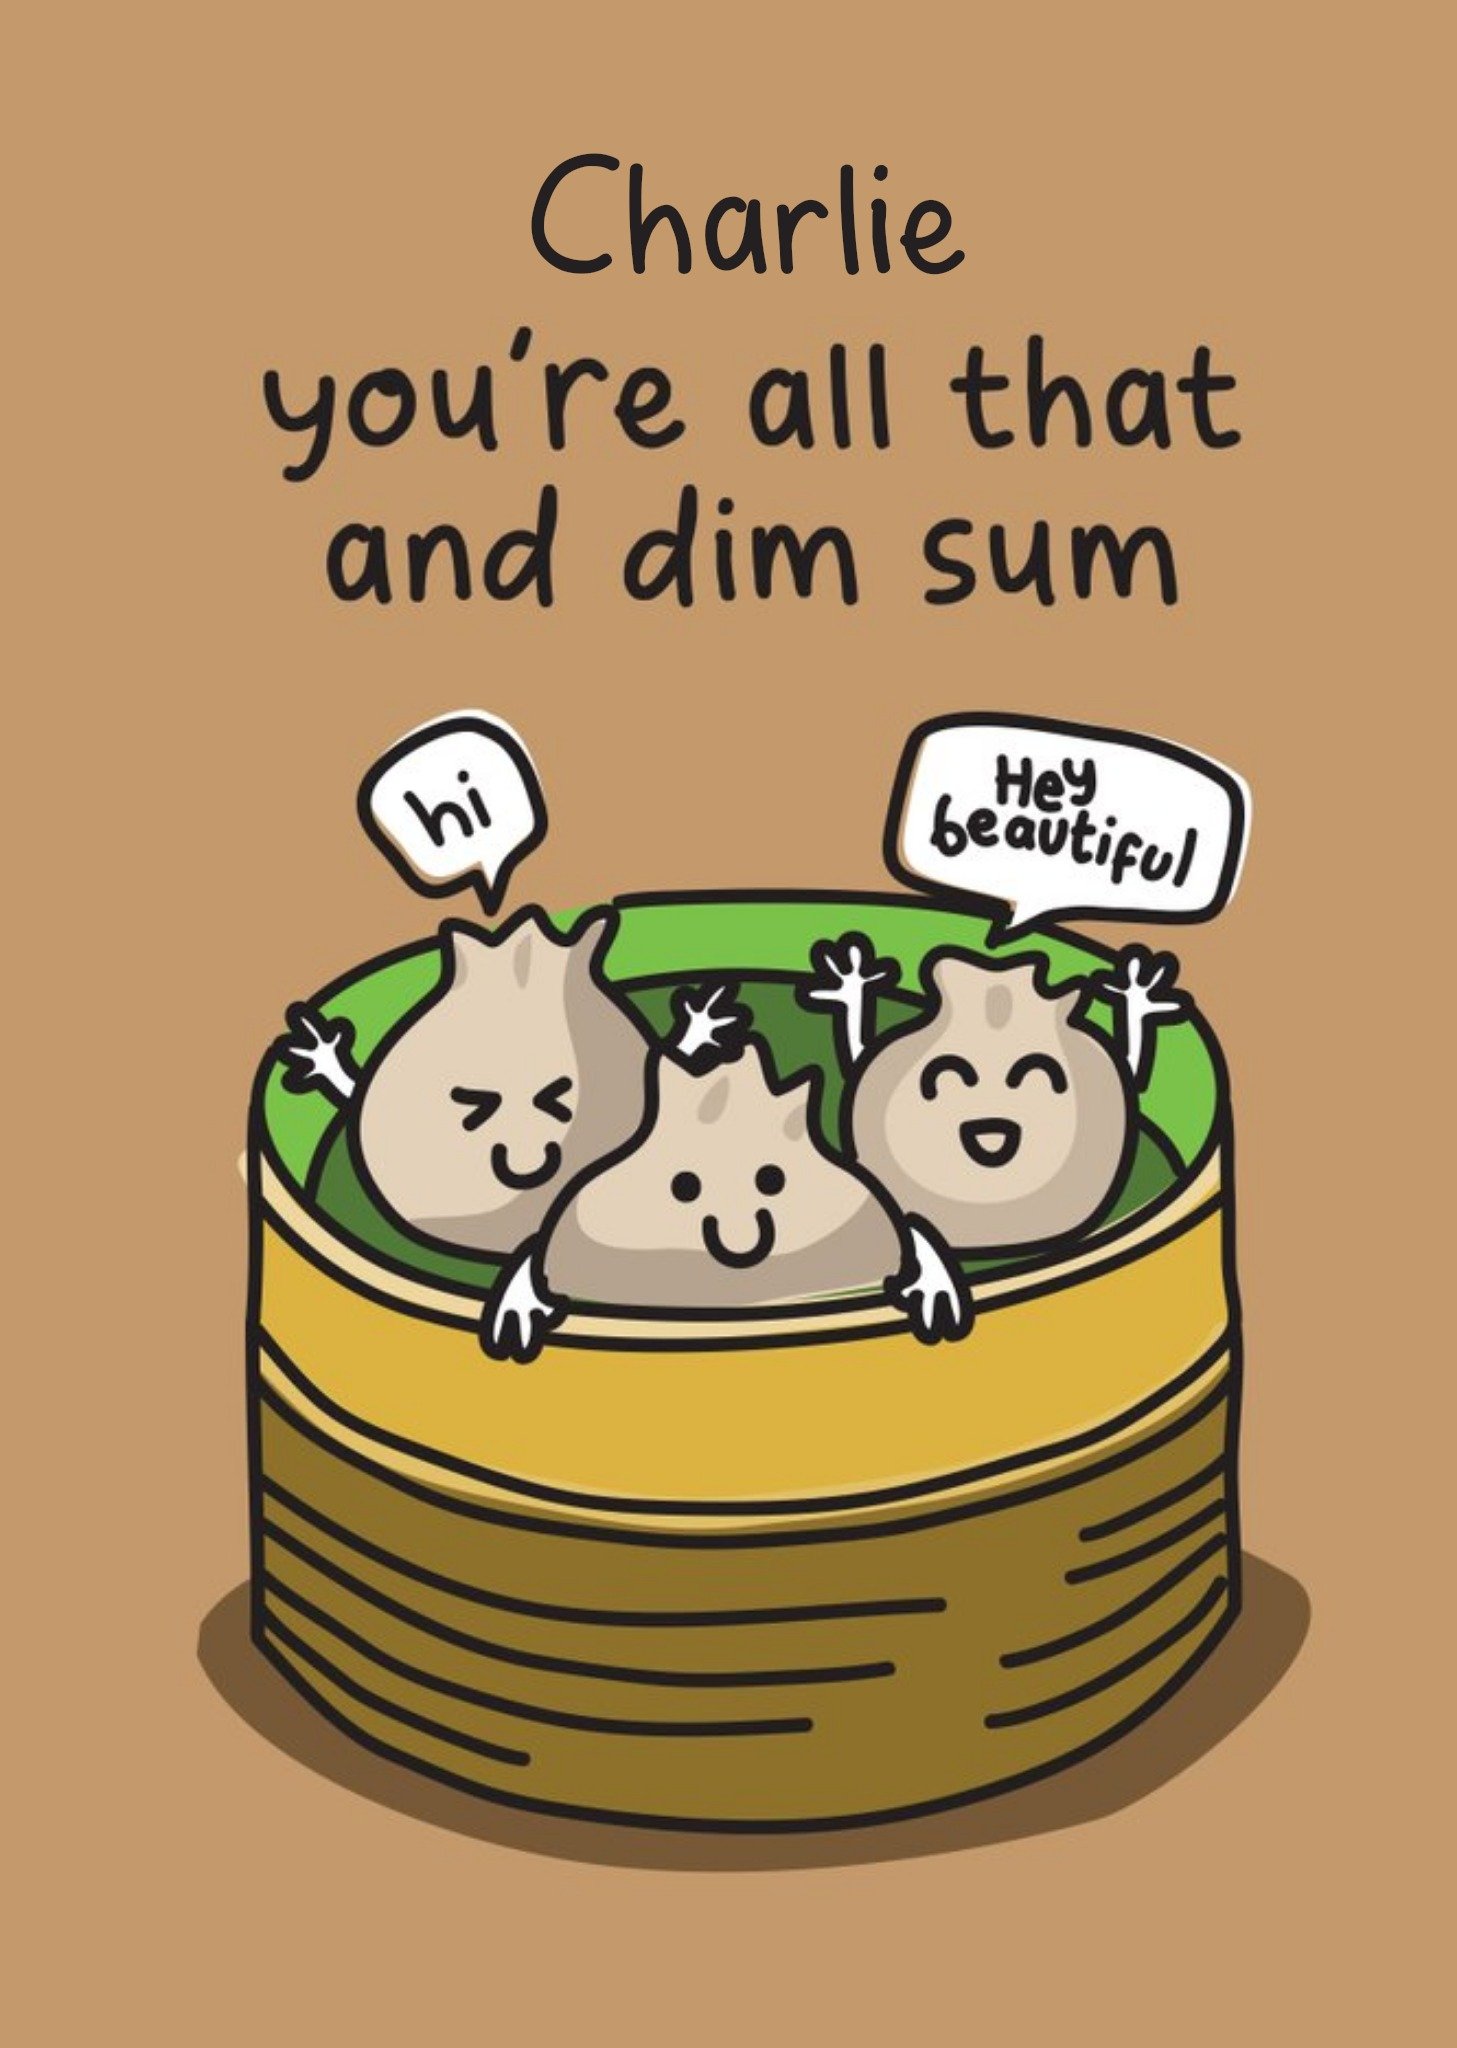 Moonpig Illustration Of Dim Sum. You're All That And Dim Sum Birthday Card Ecard